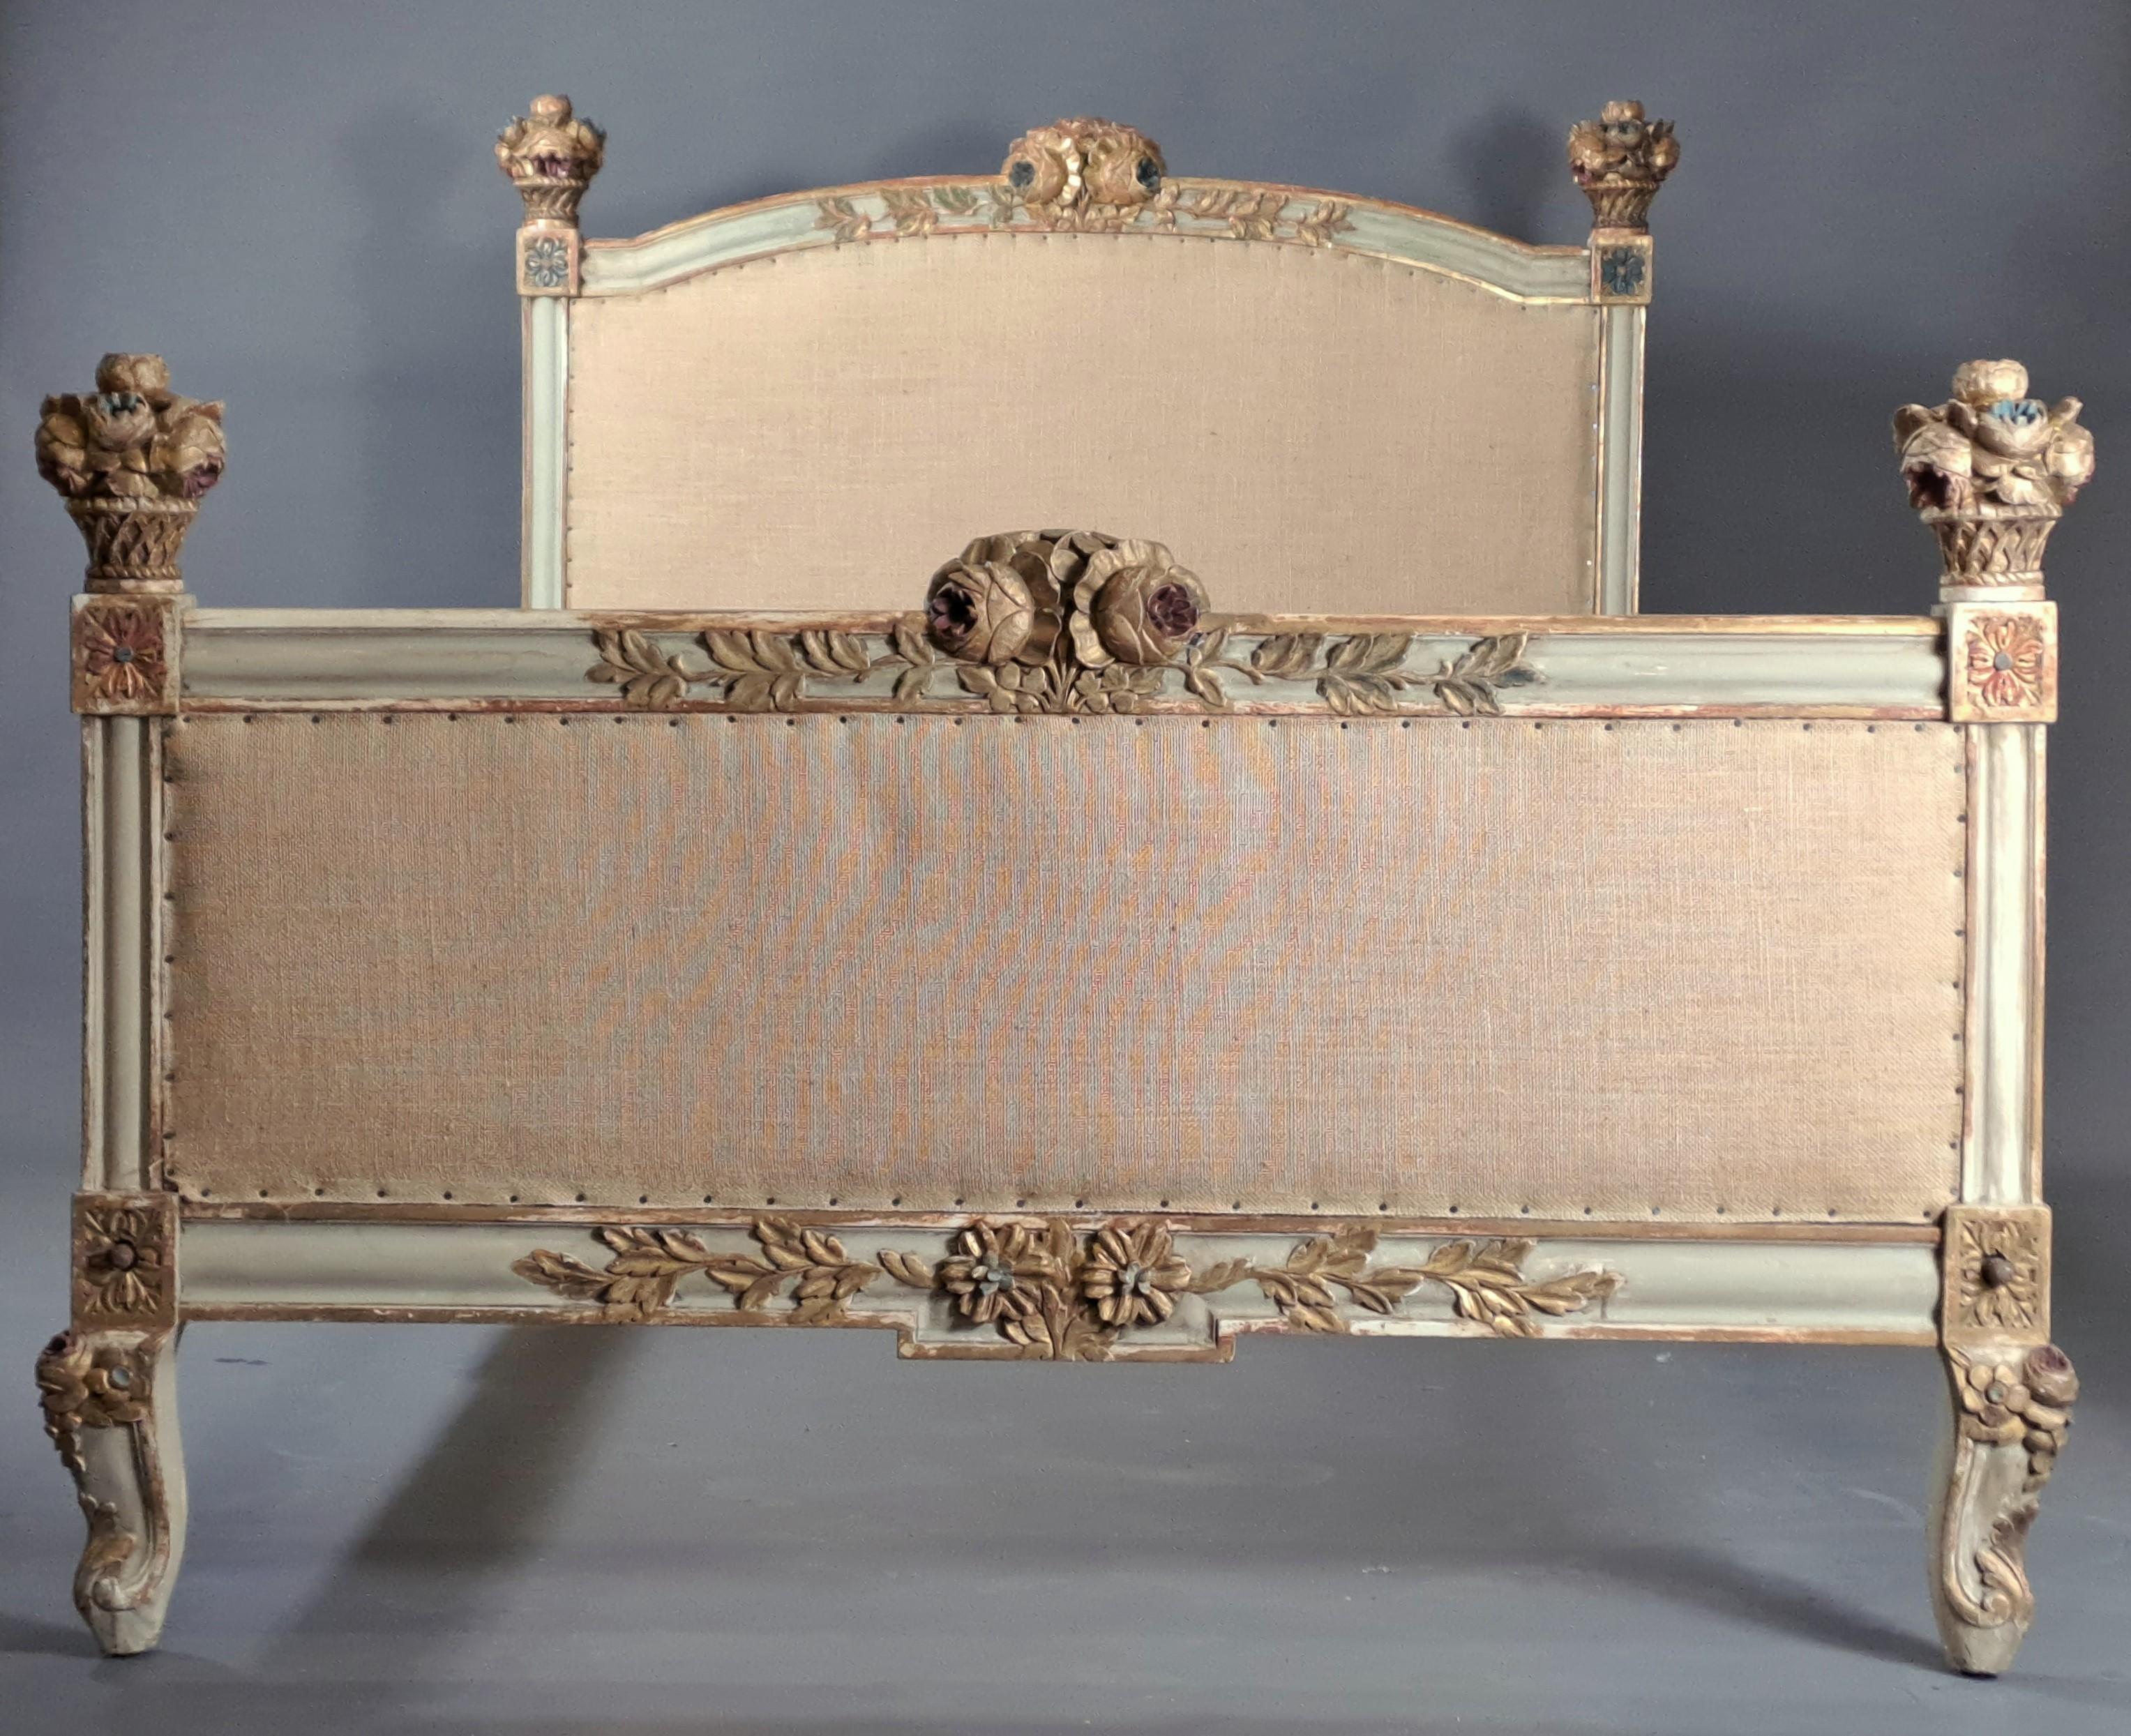 Italian Baroque Style Venetian Bed In Lacquered And Gilded Wood